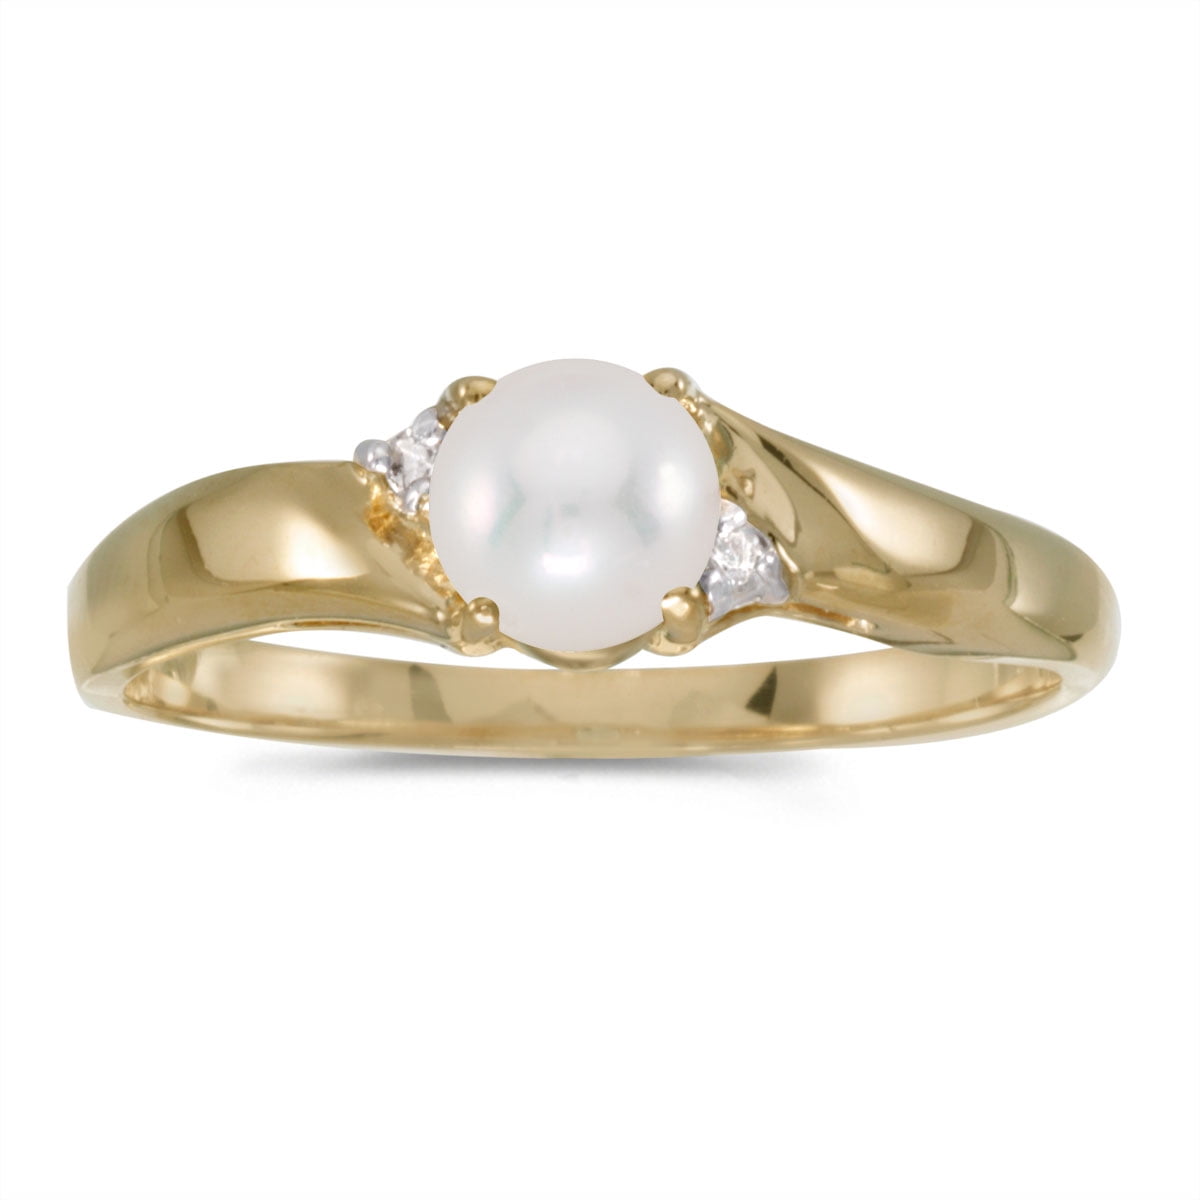 Sizes 4-13 10k Yellow or White Gold 4.5mm Freshwater Cultured Pearl And Diamond Ring